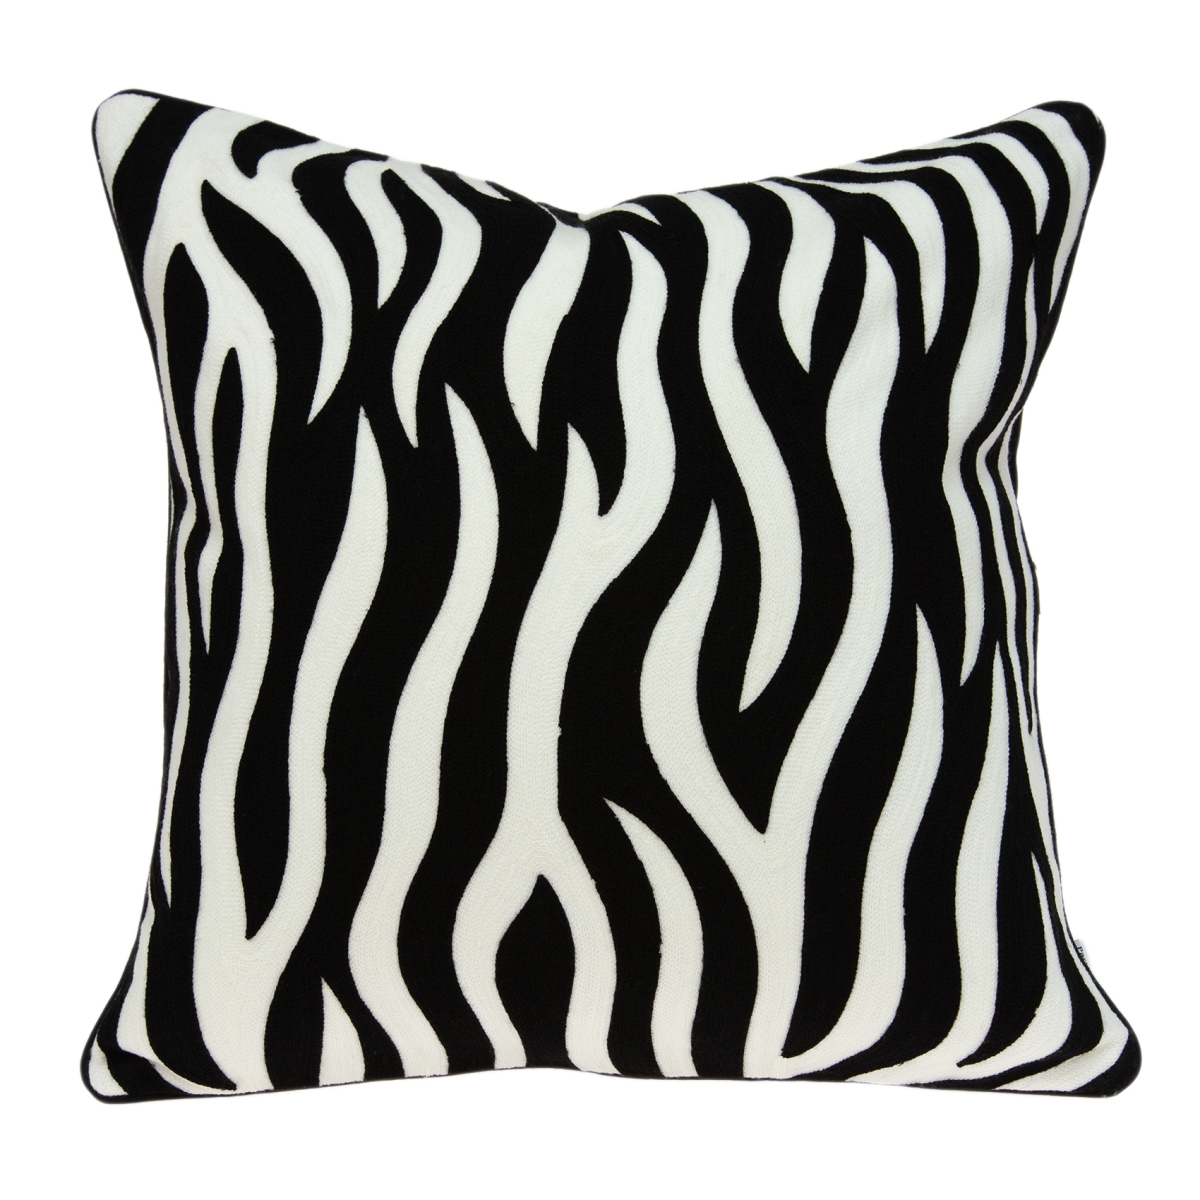 Pila11003c Simba Black & White Square Transitional Pillow Cover - 20 X 20 X 0.5 In.